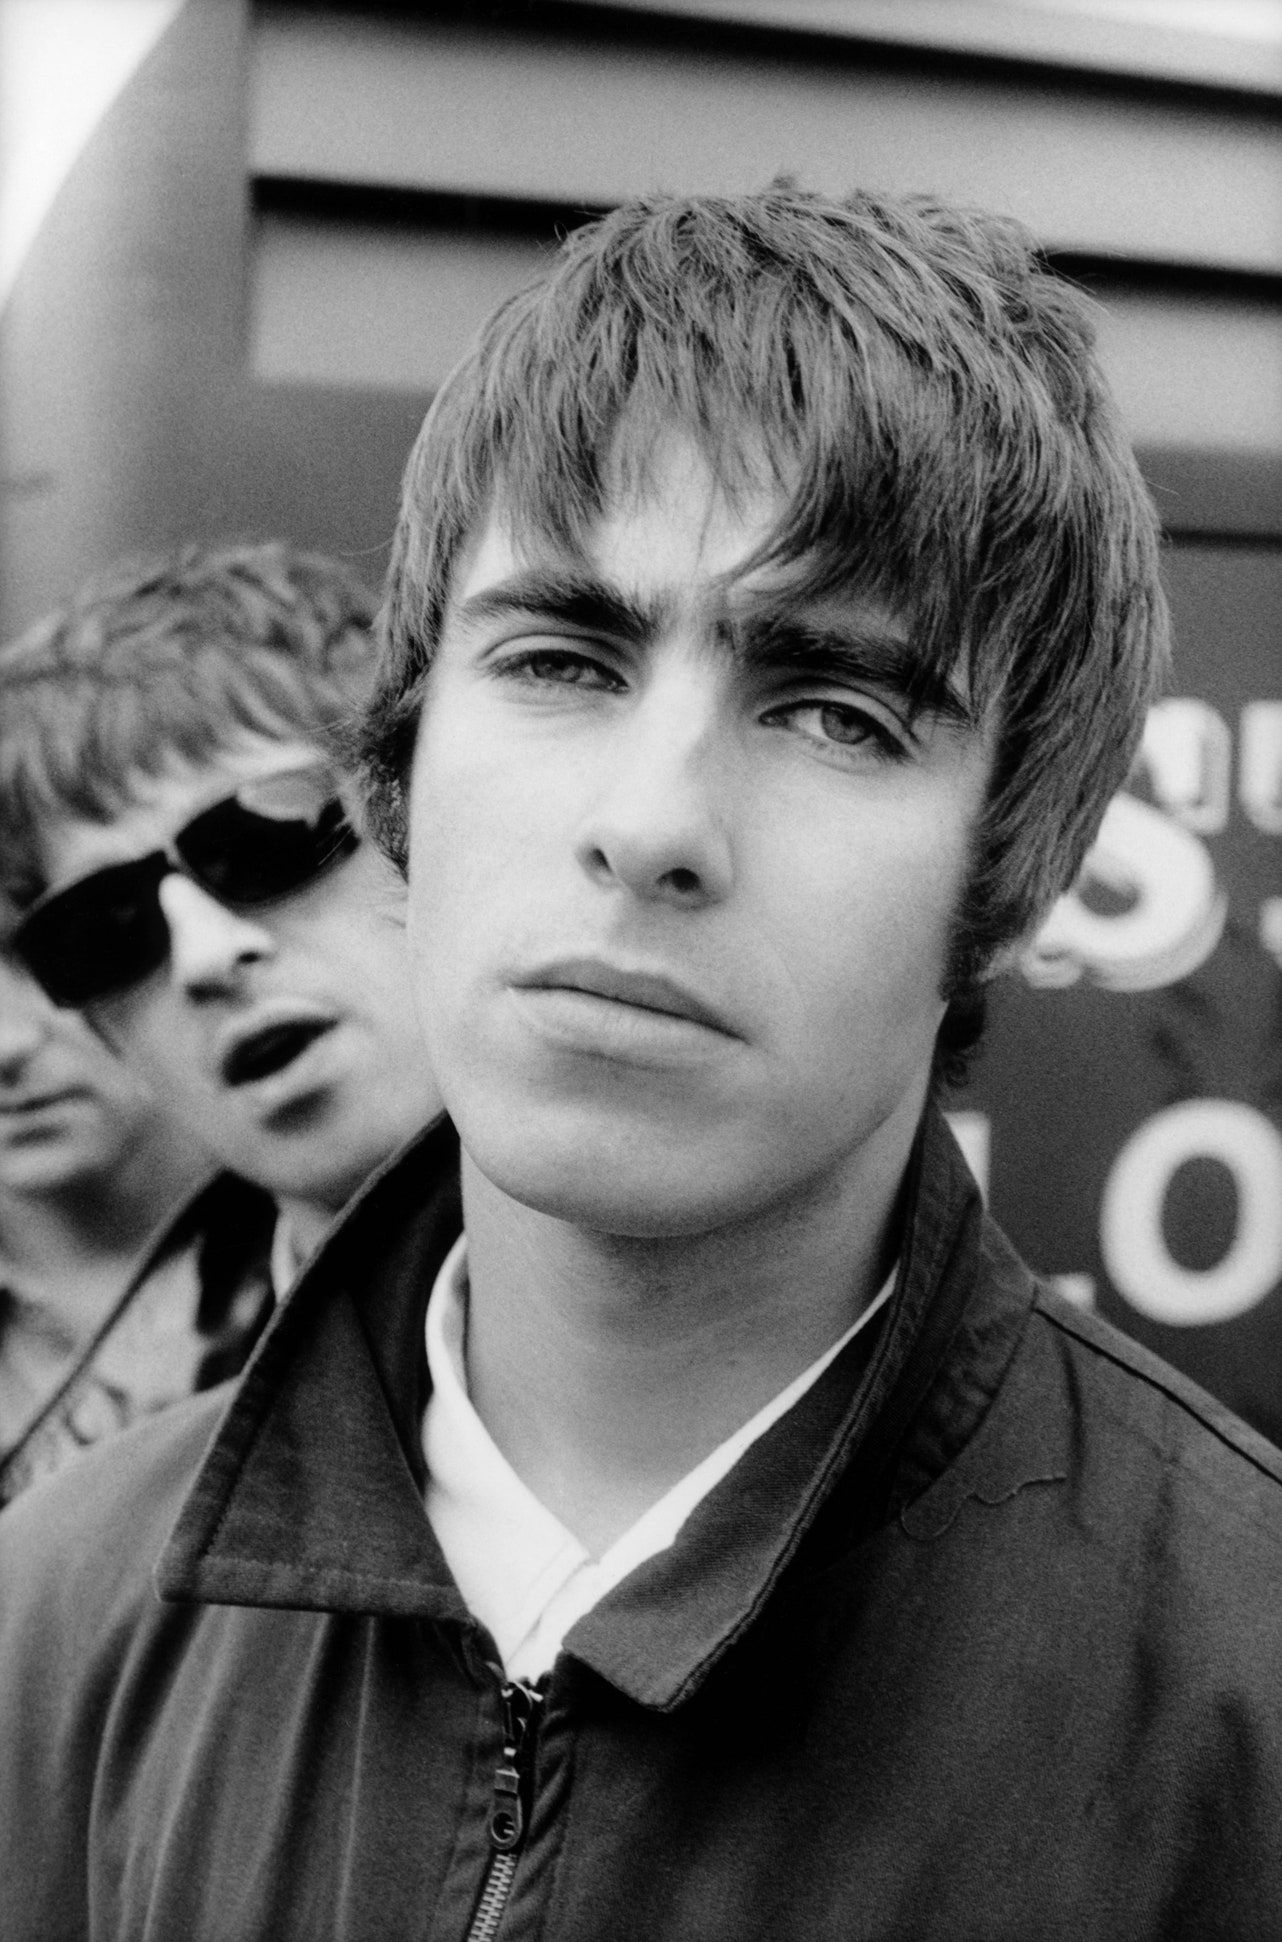 Liam Gallagher's Personal Pic Goes Viral